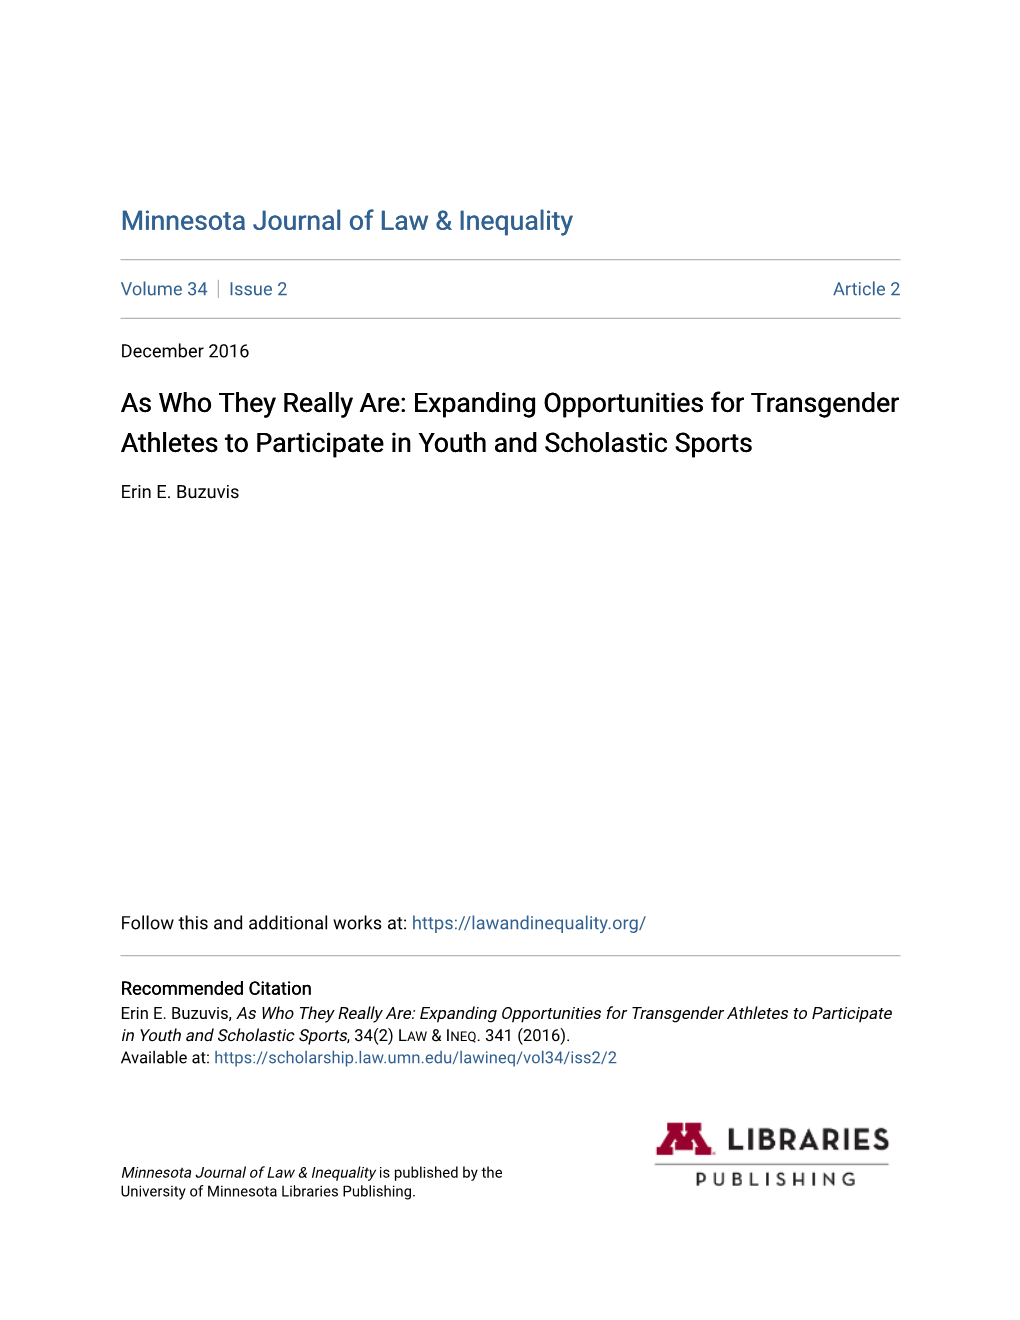 As Who They Really Are: Expanding Opportunities for Transgender Athletes to Participate in Youth and Scholastic Sports